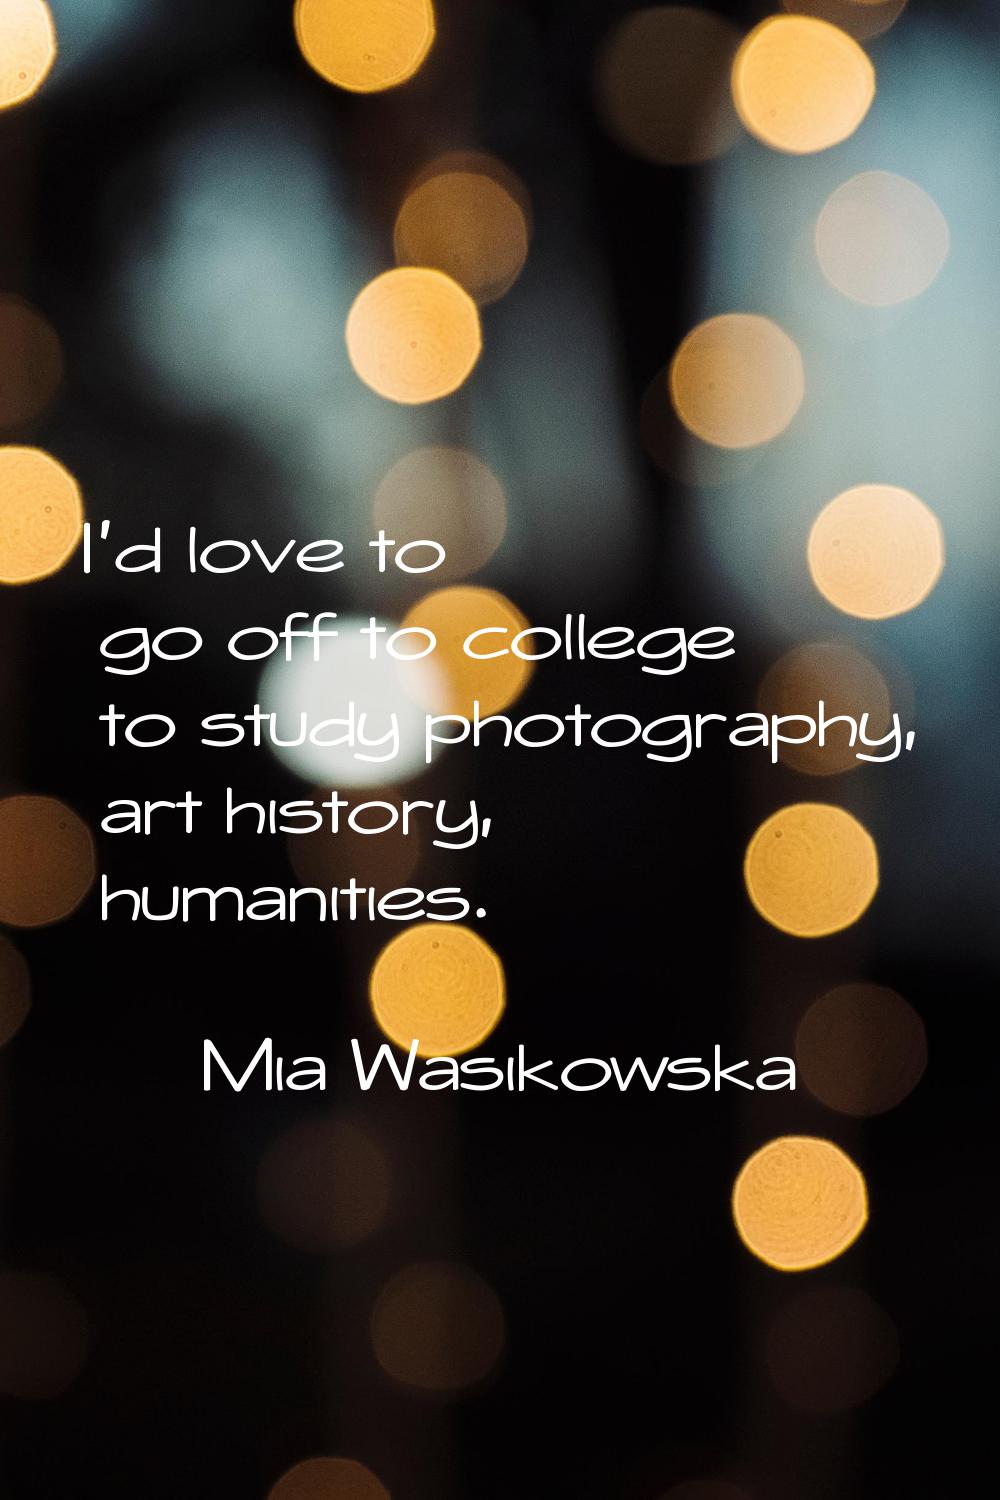 I'd love to go off to college to study photography, art history, humanities.